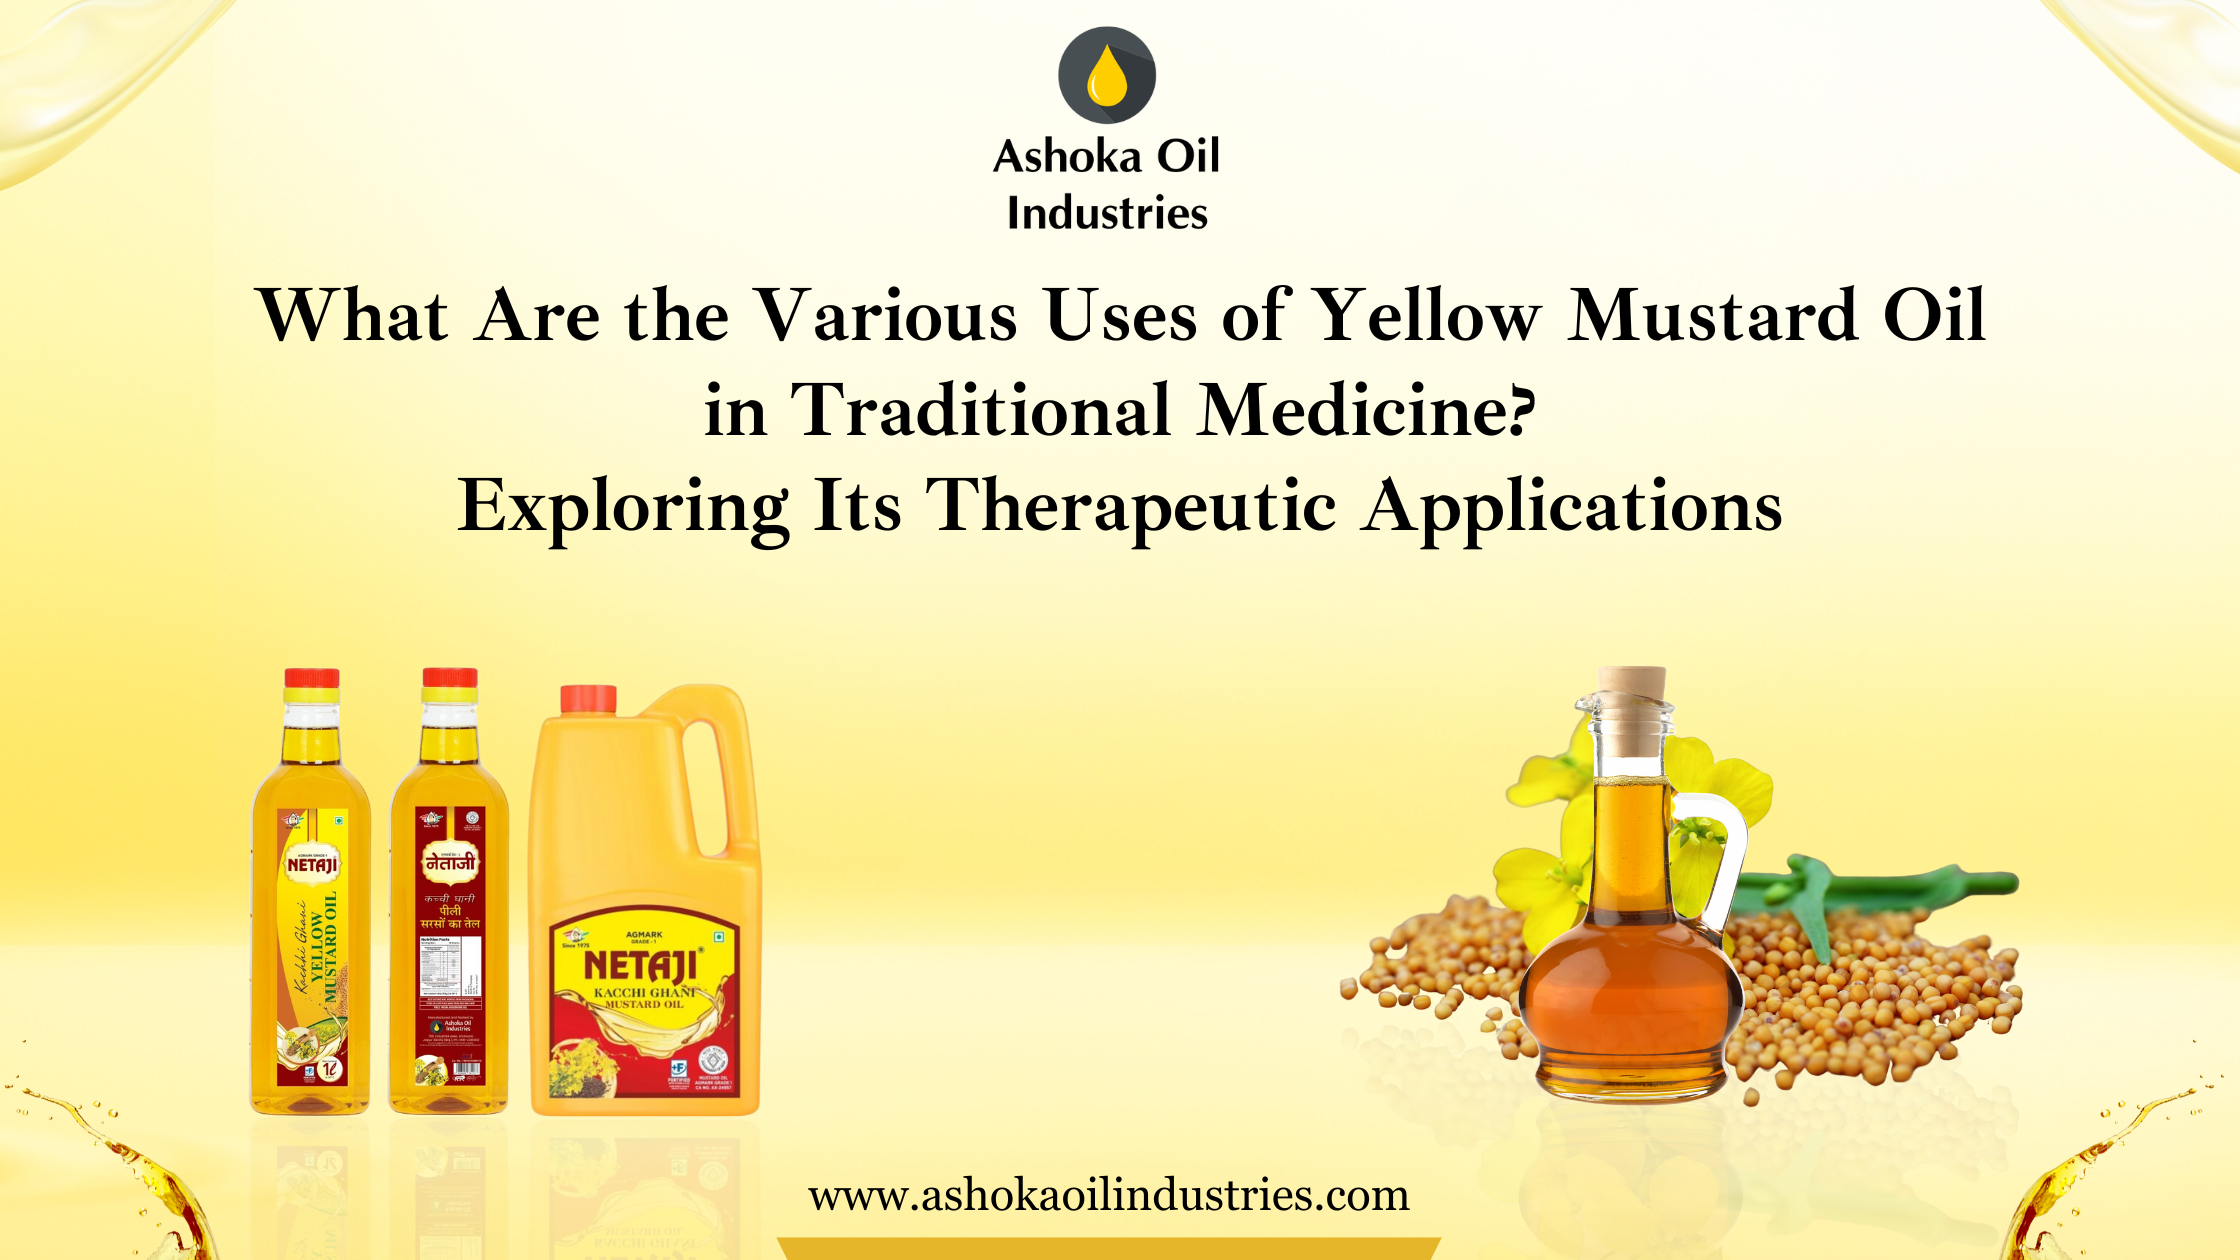 What Are the Various Uses of Yellow Mustard Oil in Traditional Medicine?